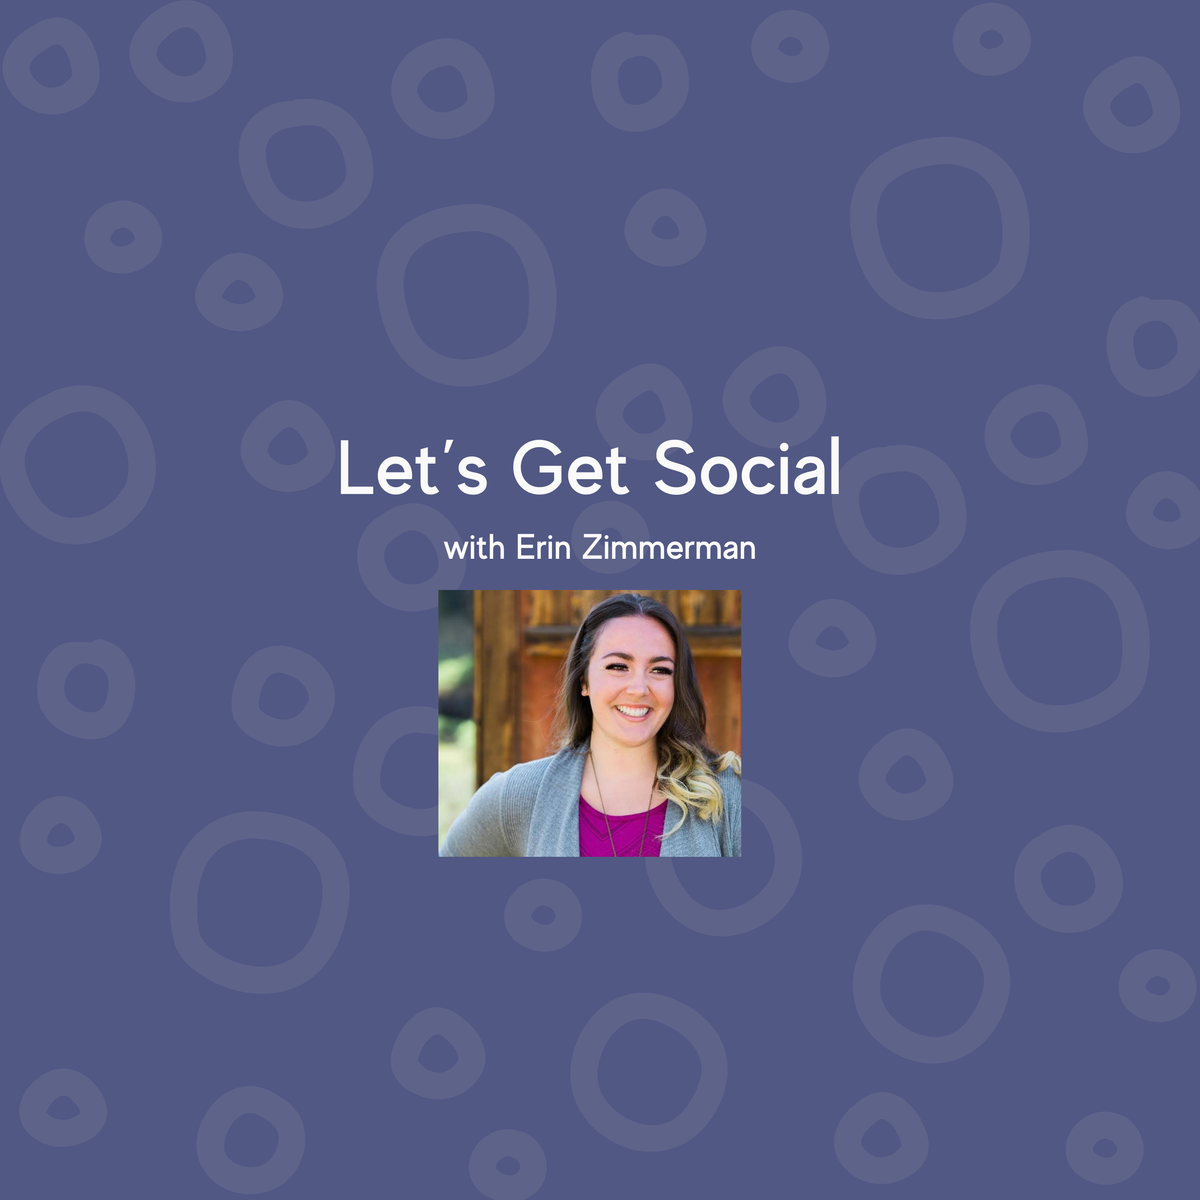 Let’s Get Social with Erin Zimmerman